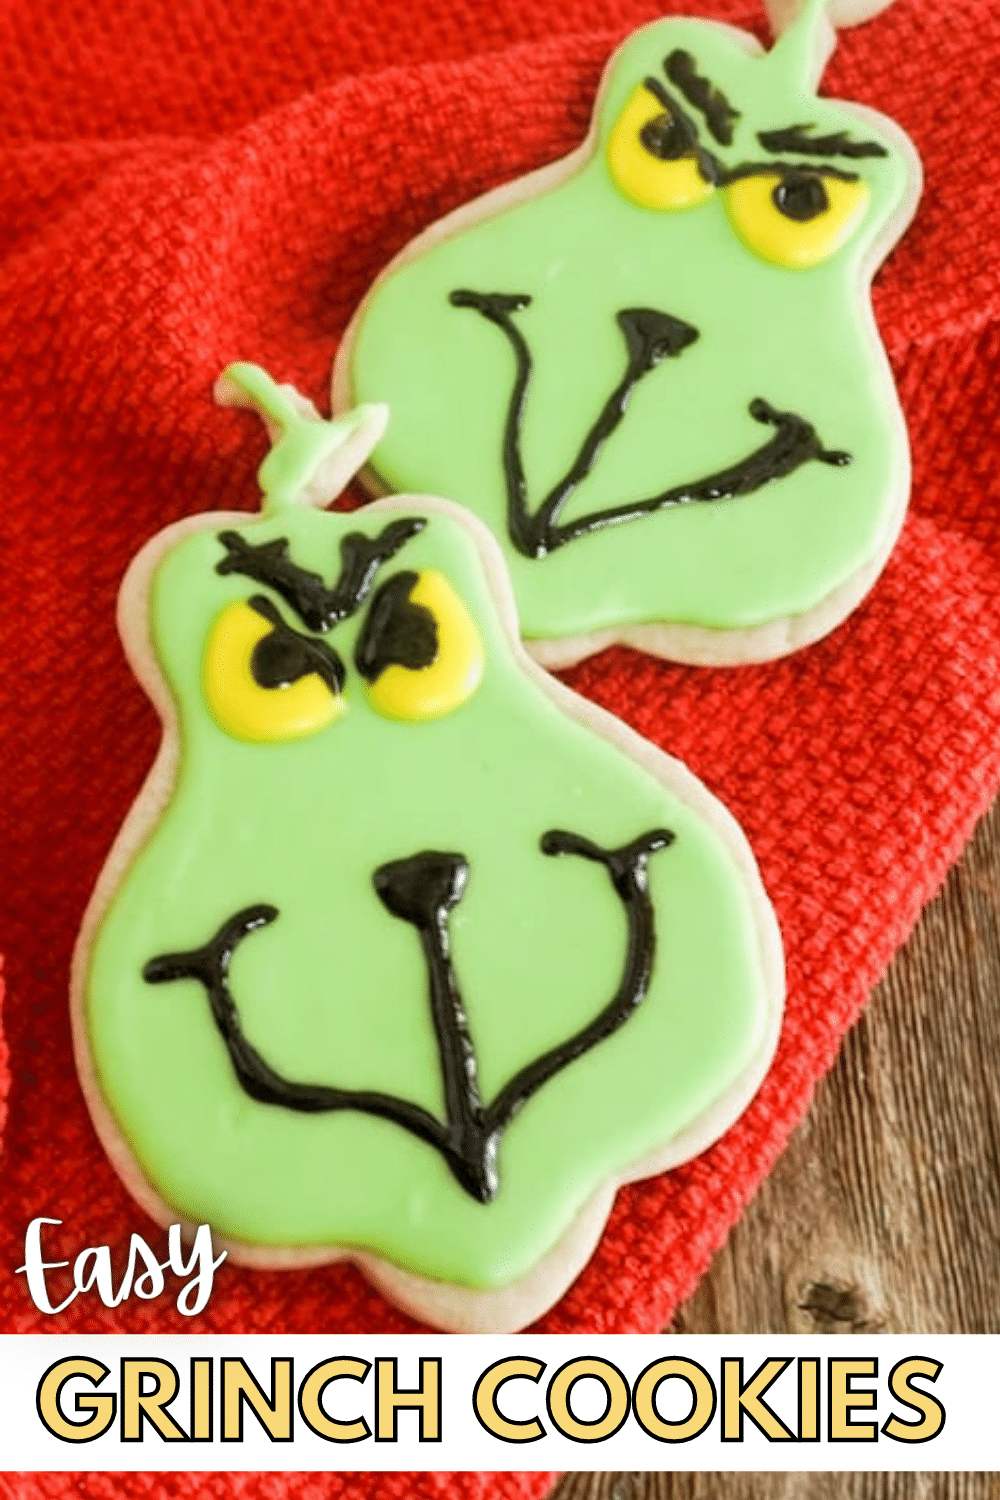 Do you love cookies, Christmas, and the Grinch? Come see how all three of these are brought together in this easy Grinch Cookies recipe. #grinch #christmas #cookierecipe via @wondermomwannab